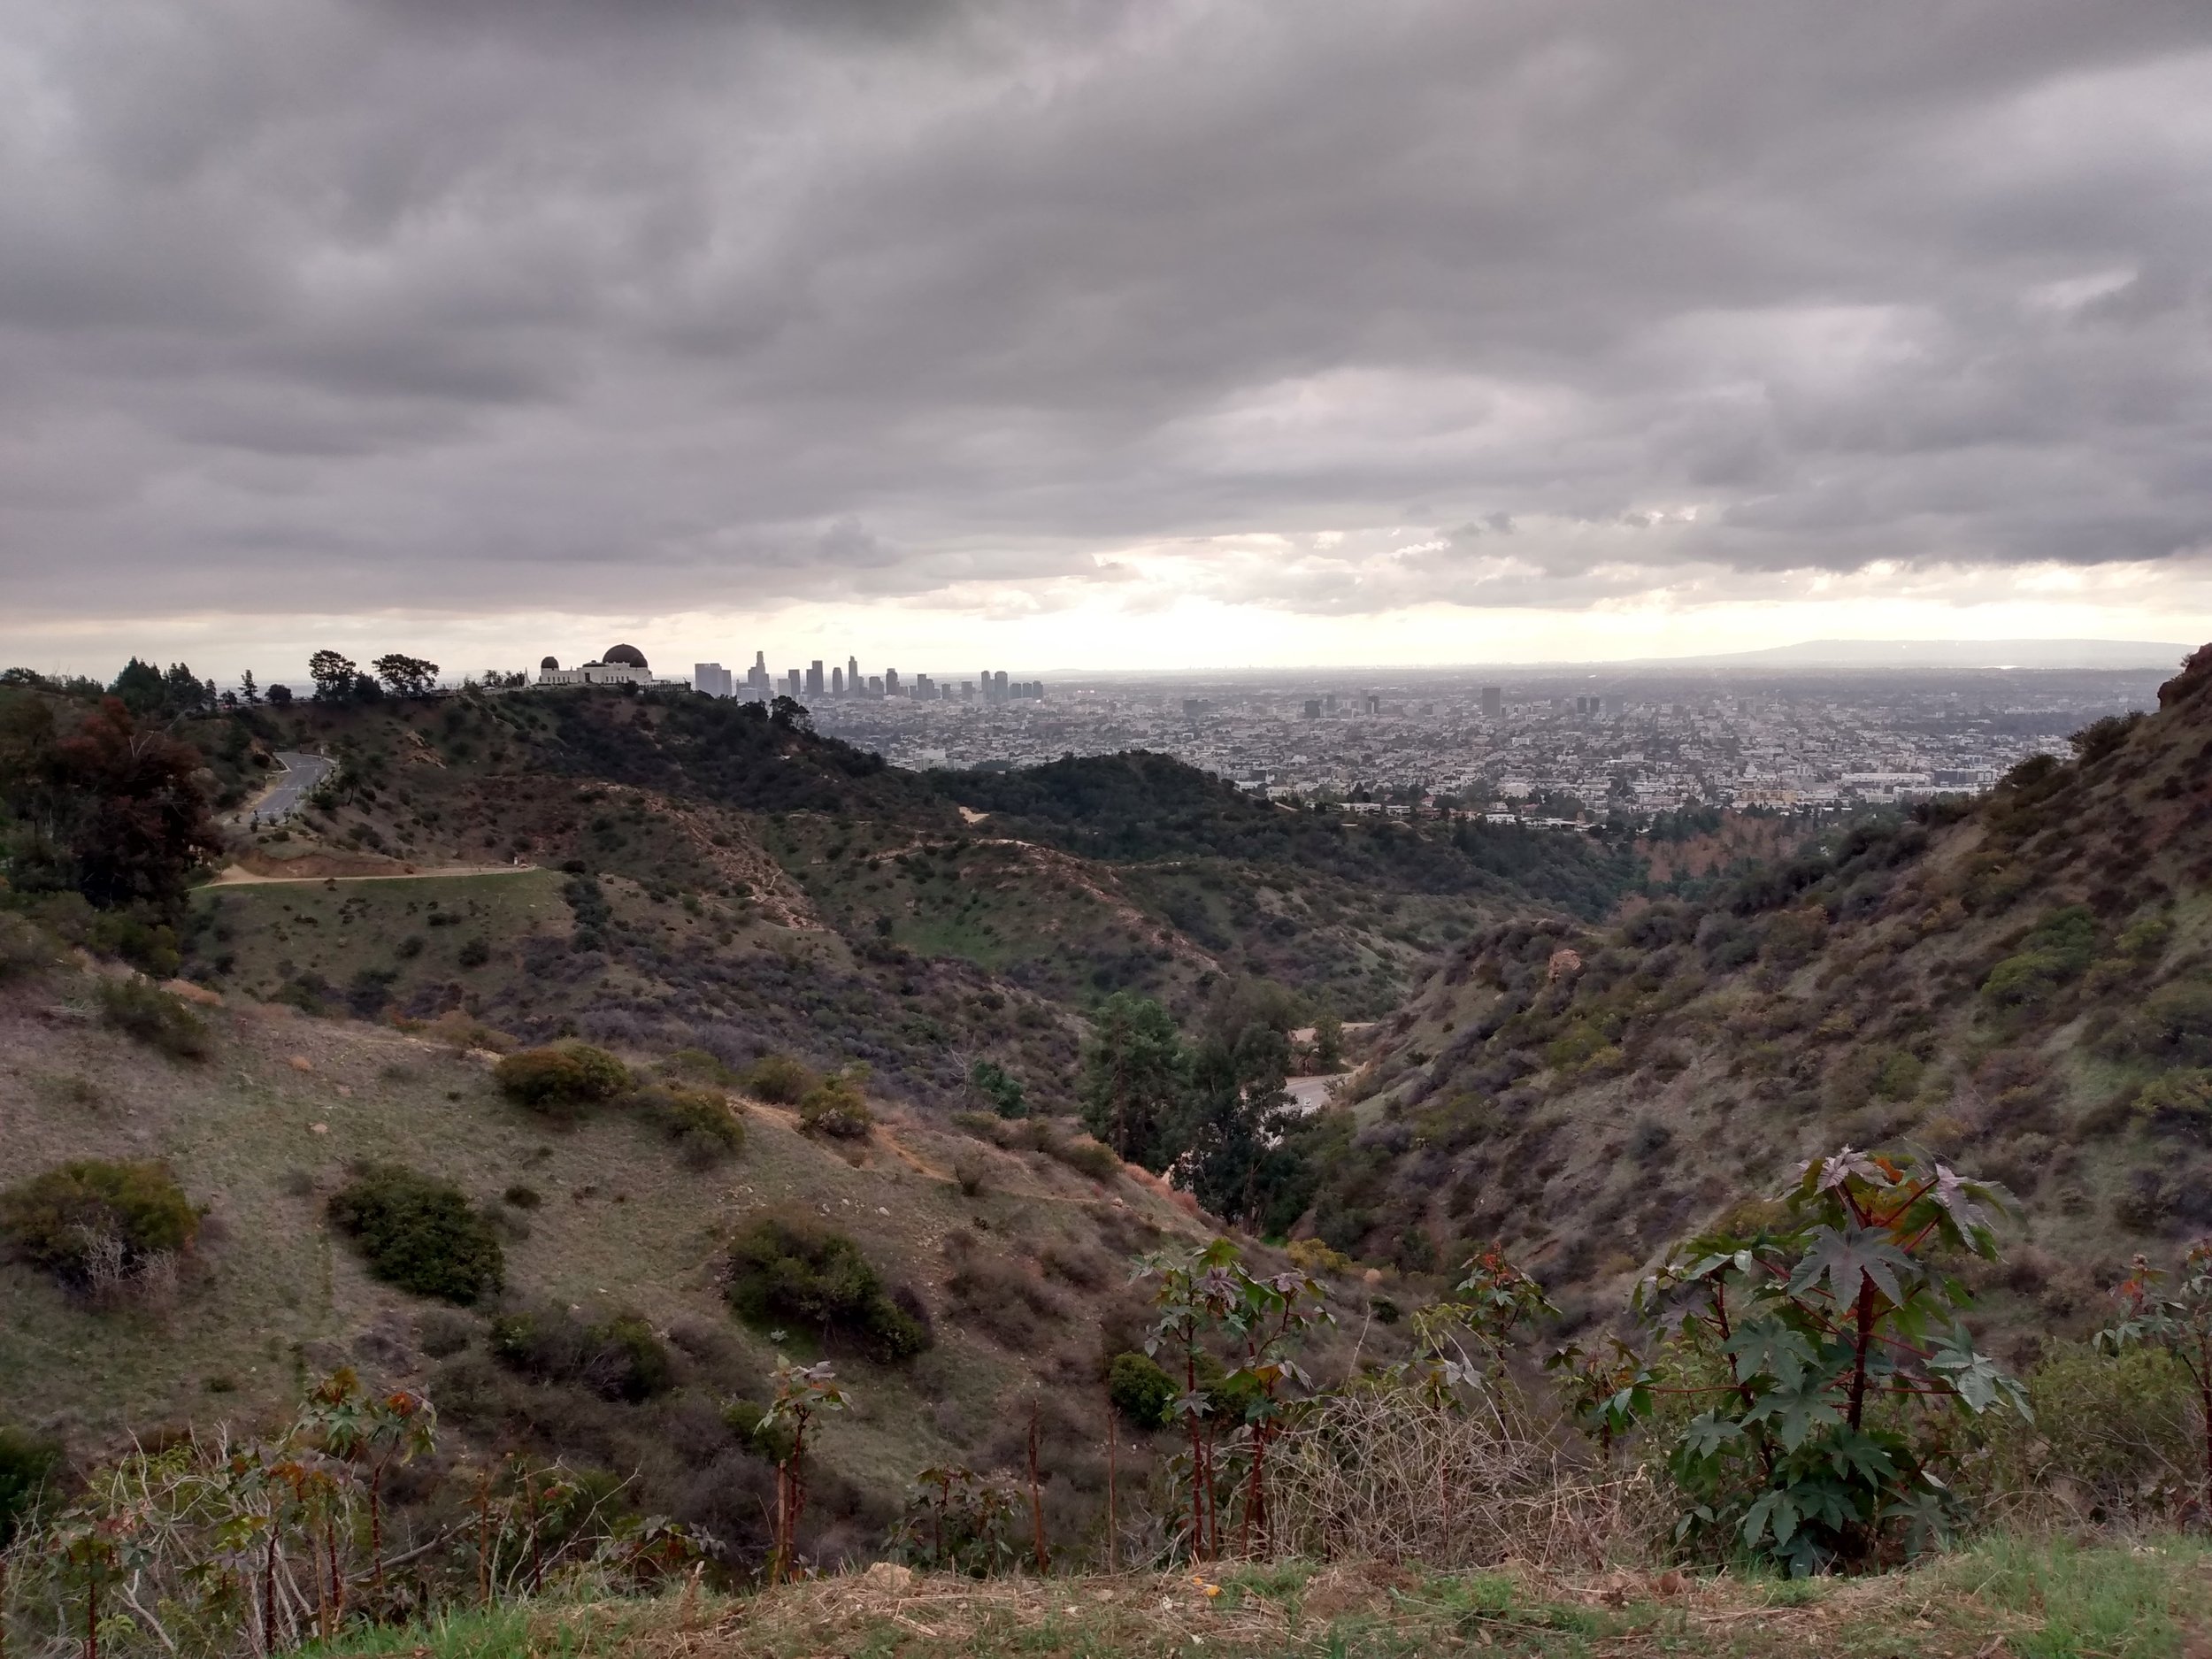 Griffith Park observatory here. Once again a cloudy/wet day. #CaliforniaLies